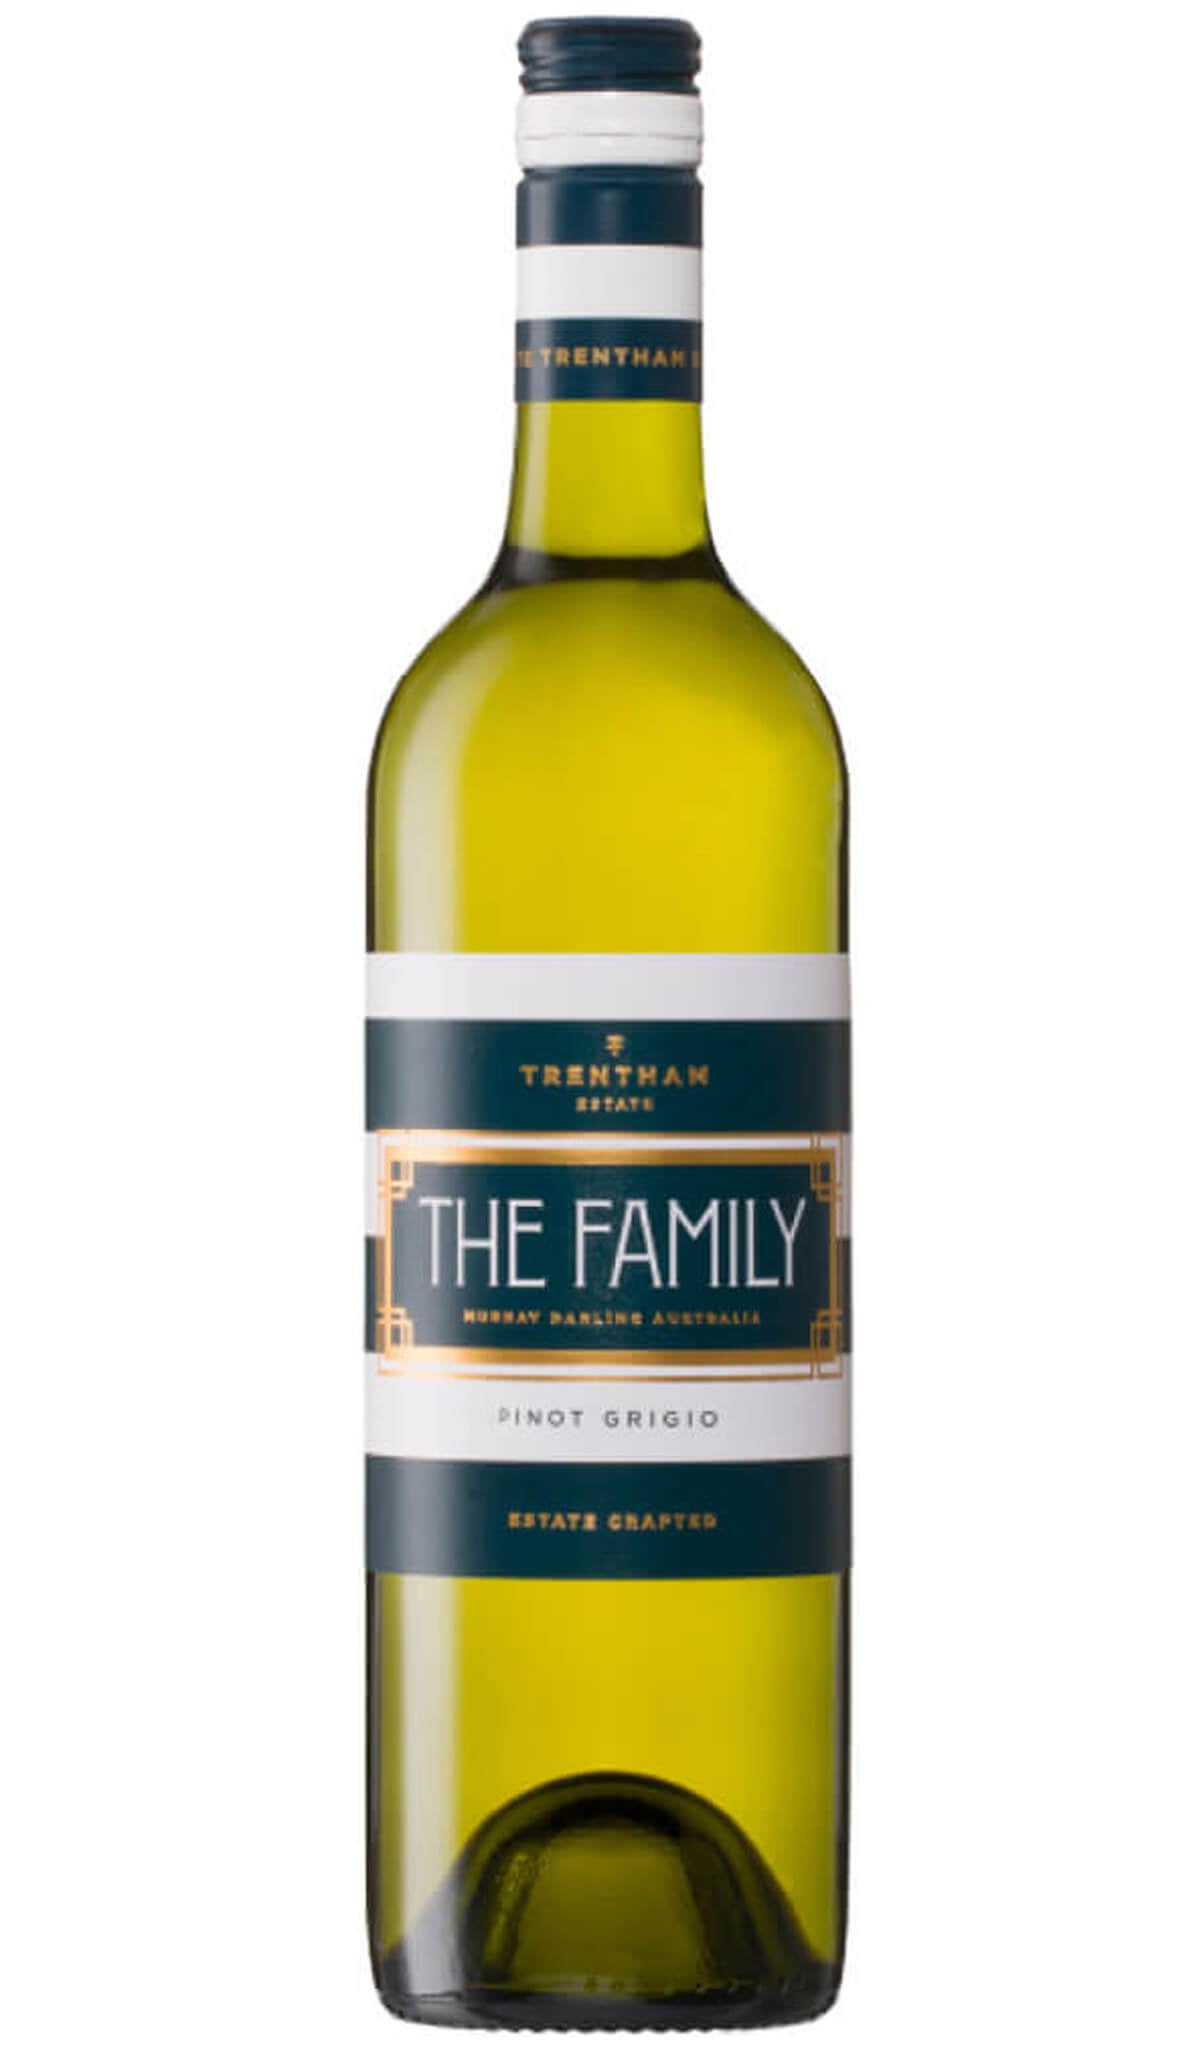 Find out more or buy Trentham Estate The Family Pinot Grigio 2022 (Murray Darling) online at Wine Sellers Direct - Australia’s independent liquor specialists.